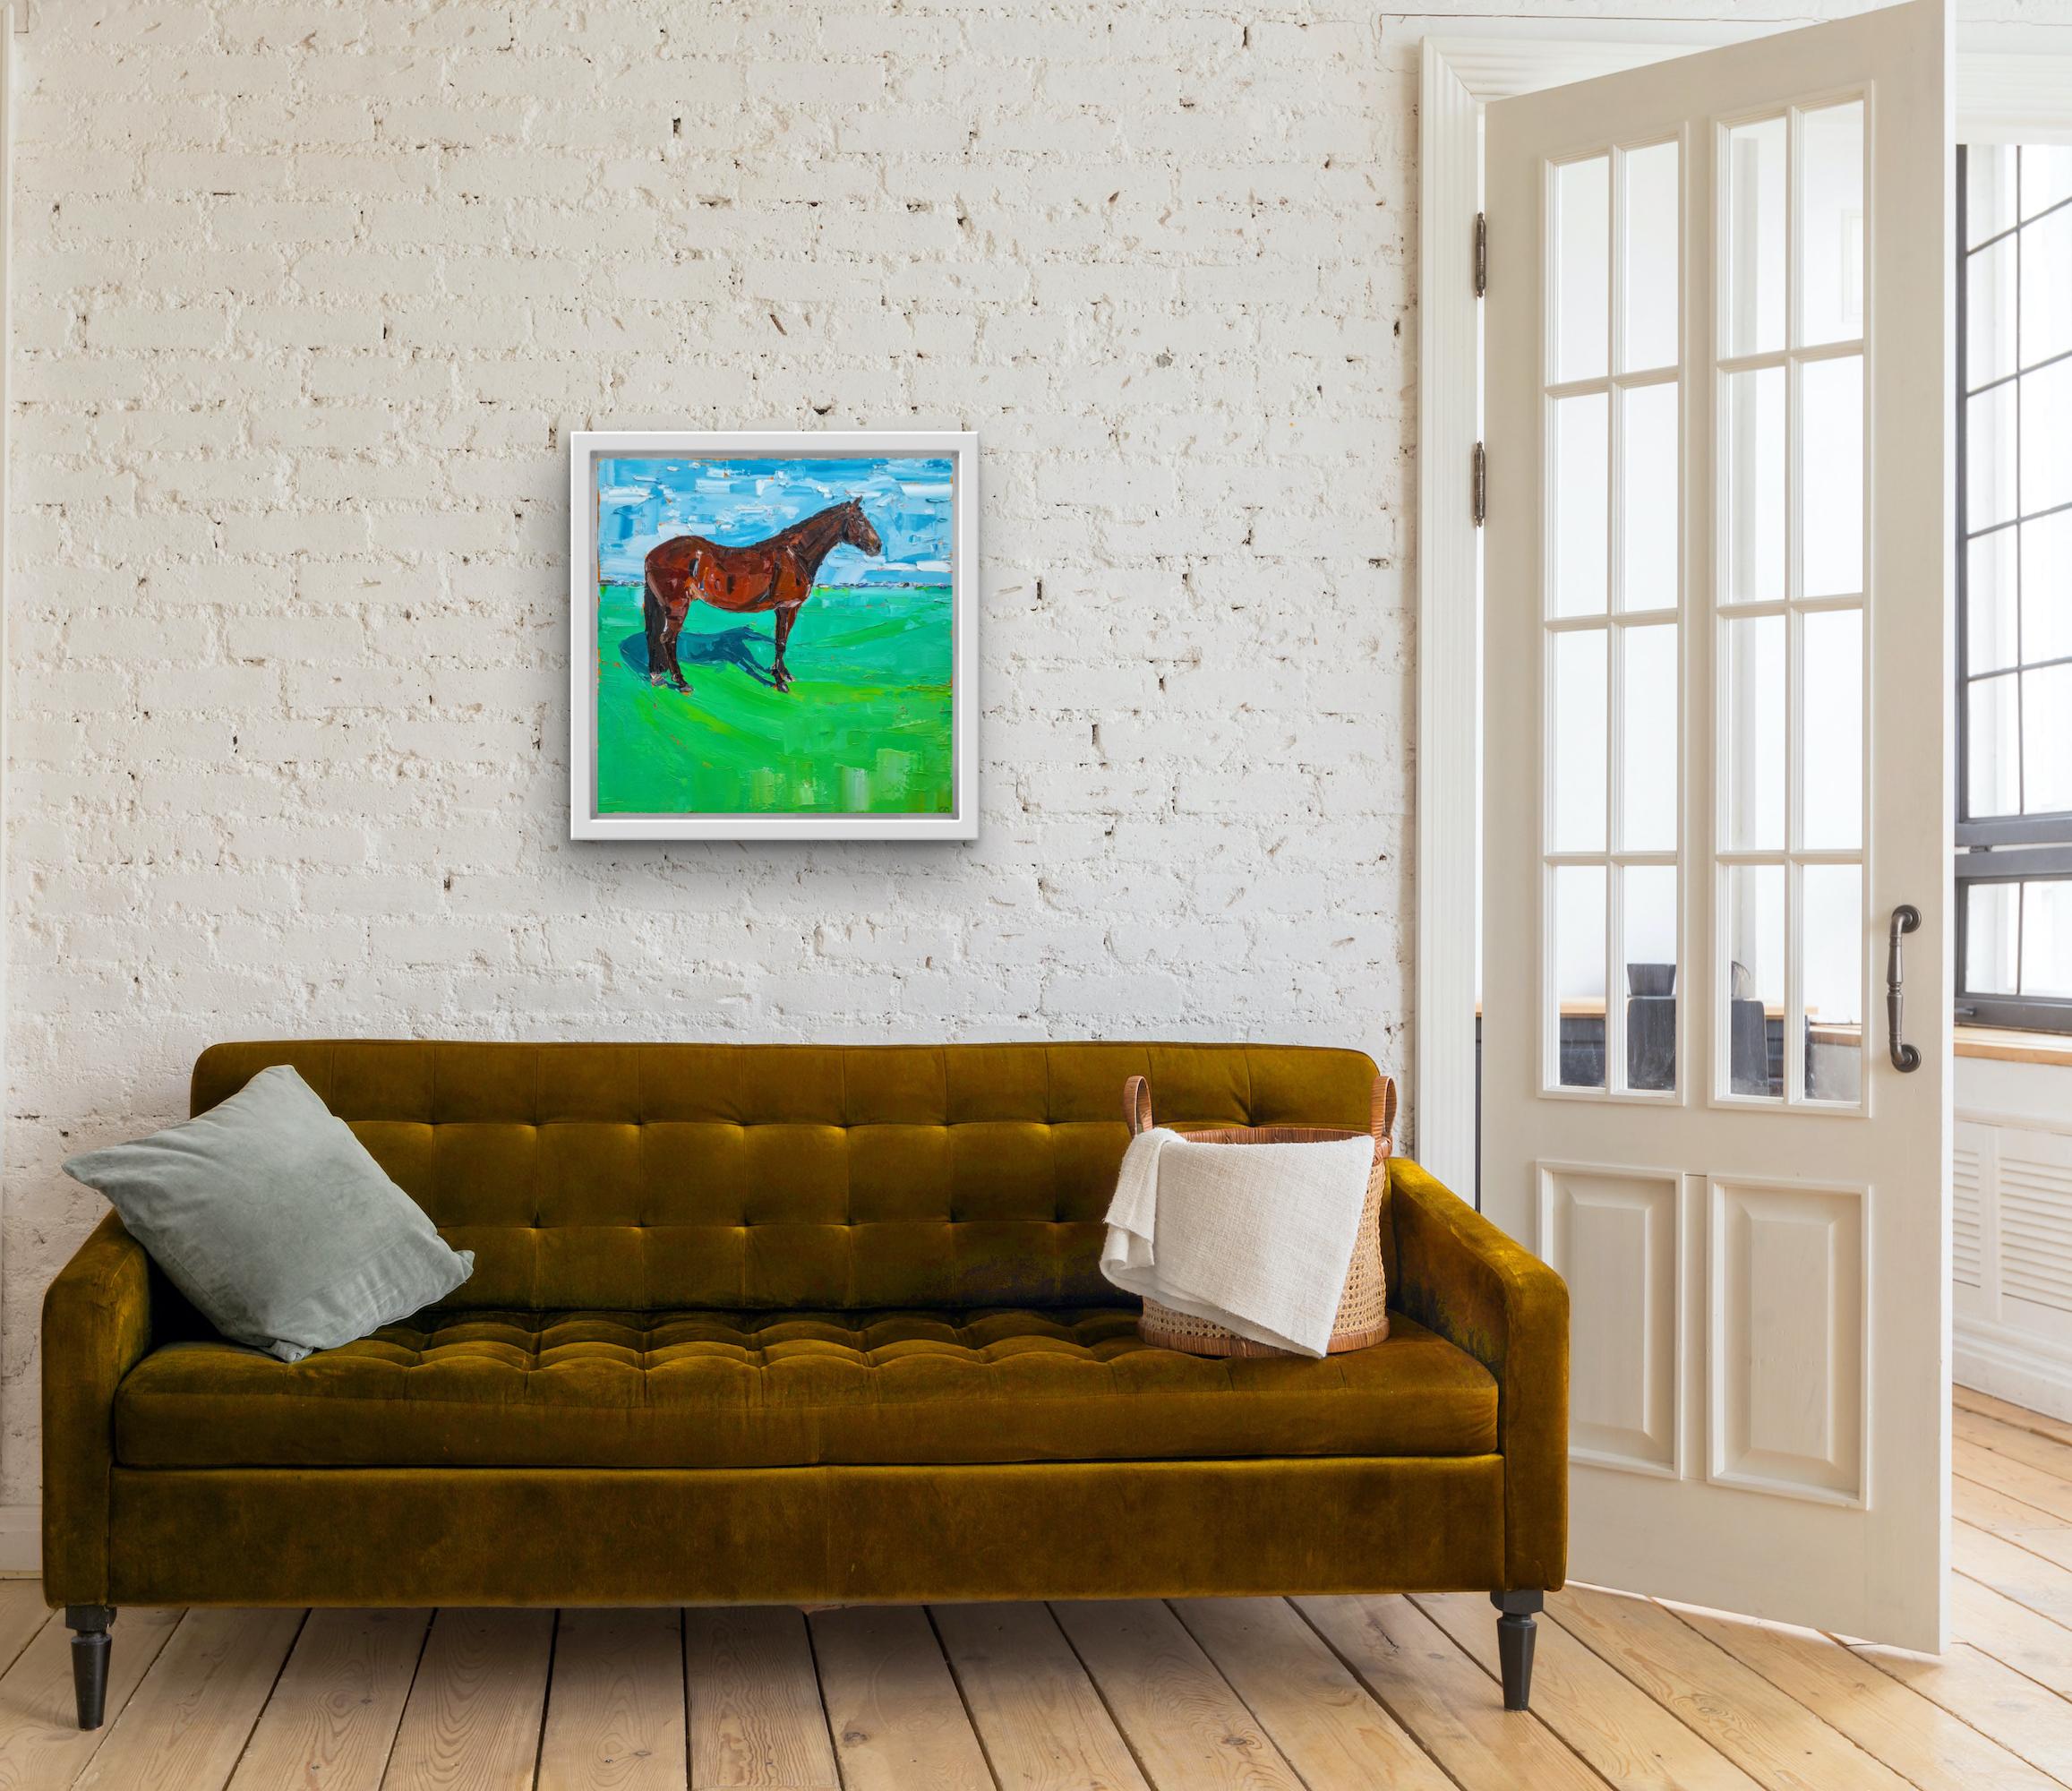 ‘Hunter’ (Bay Horse) by Georgie Dowling [2021]
original and hand signed by the artist 
Oil paint on canvas
Complete Size of Unframed Work: H:40 cm x W:40 cm x D:2cm
Sold Unframed
Please note that insitu images are purely an indication of how a piece